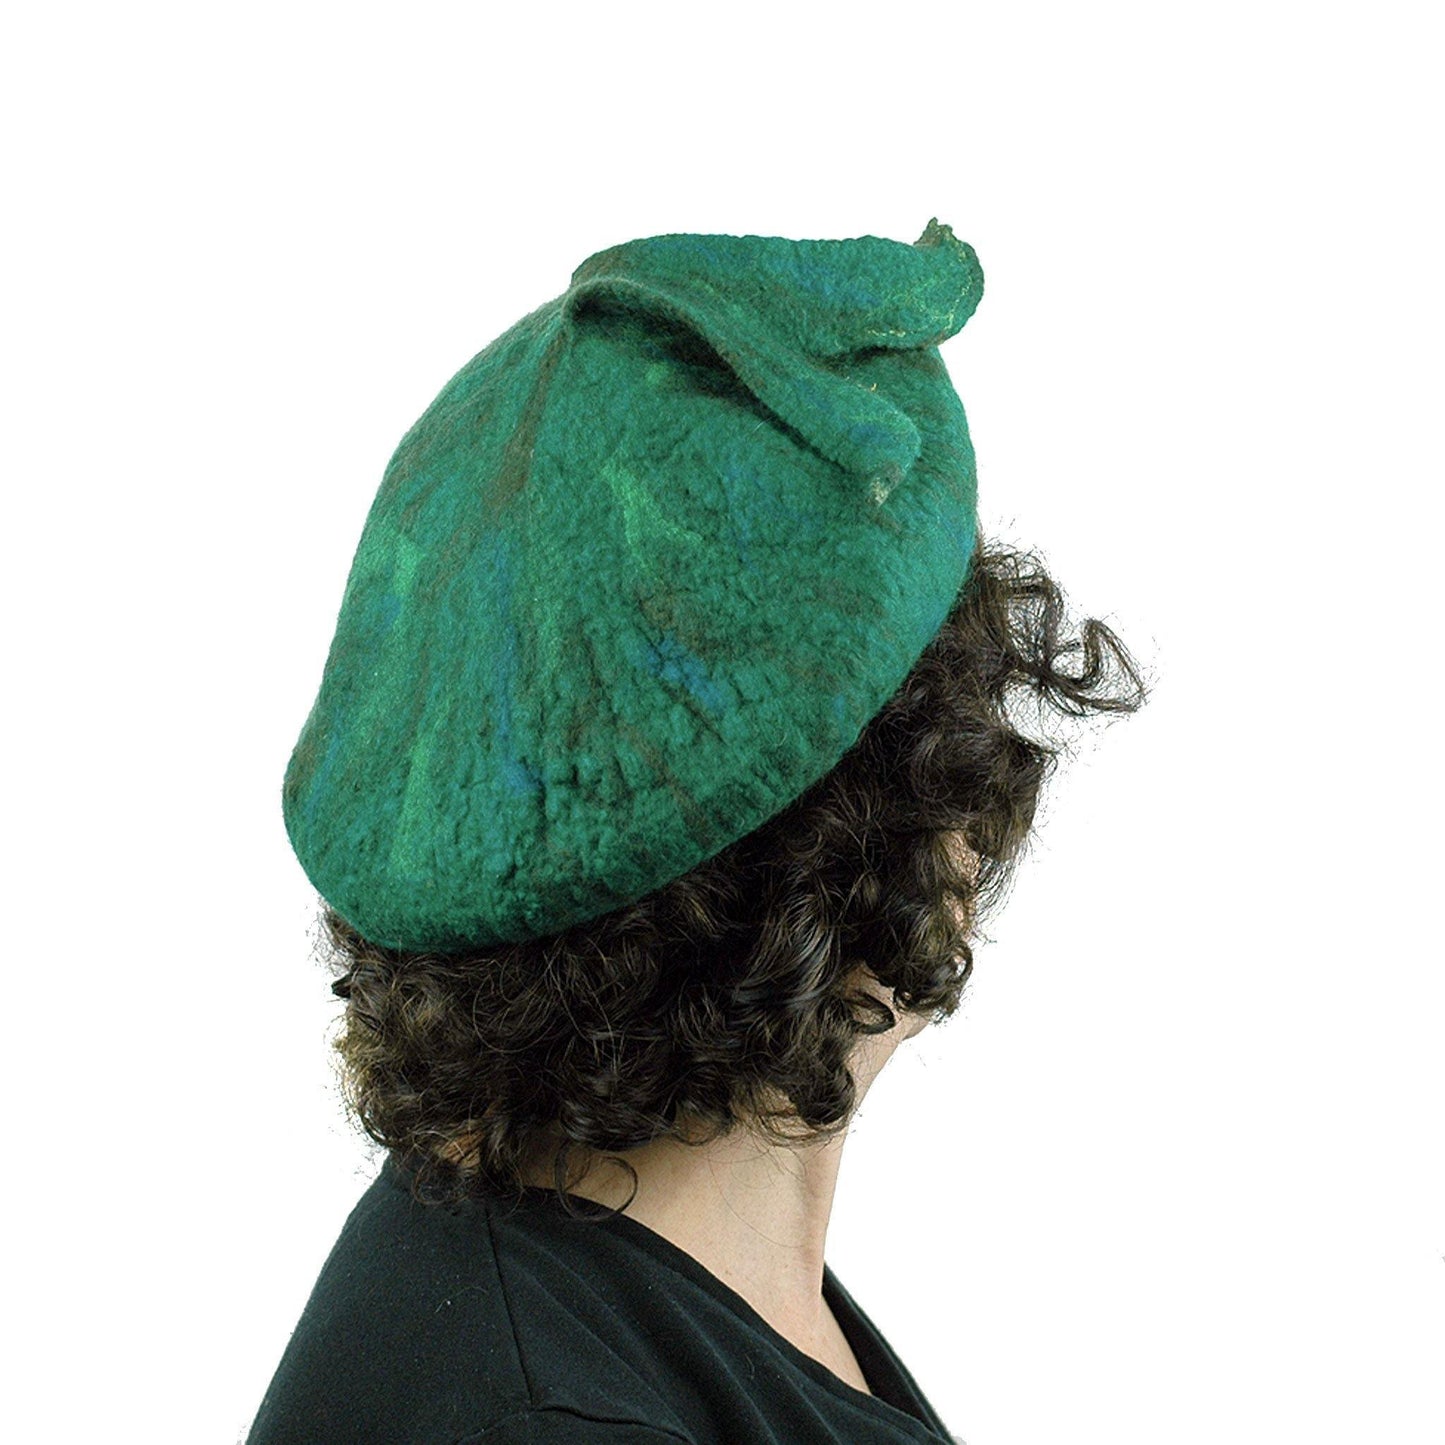 Felted Green Fishtail Beret - back view